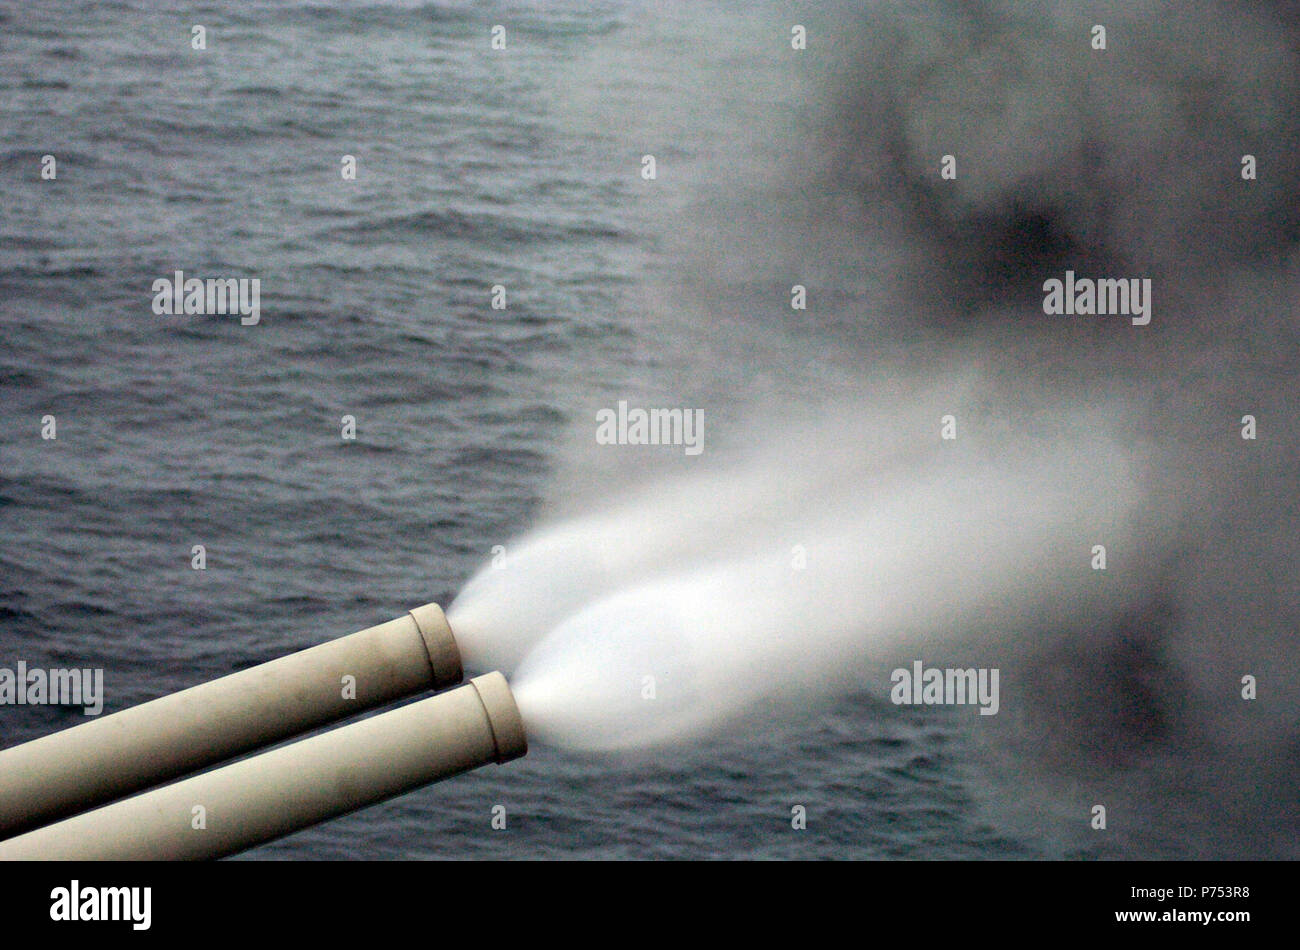 ABOARD ALMIRANTE GRAU IN PACIFIC OCEAN (July 3, 2004) - The Peruvian light missile cruiser B.A.P. Almirante Grau (CLM-81) fires 15.2 cm caliber cannons for naval surface fire support of the largest Latin American amphibious assault ever during UNITAS 45-04.  Eleven partner nations from the U.S. and Latin America came together for the largest multilateral exercise in the Southern Hemisphere.  U.S. Navy Stock Photo